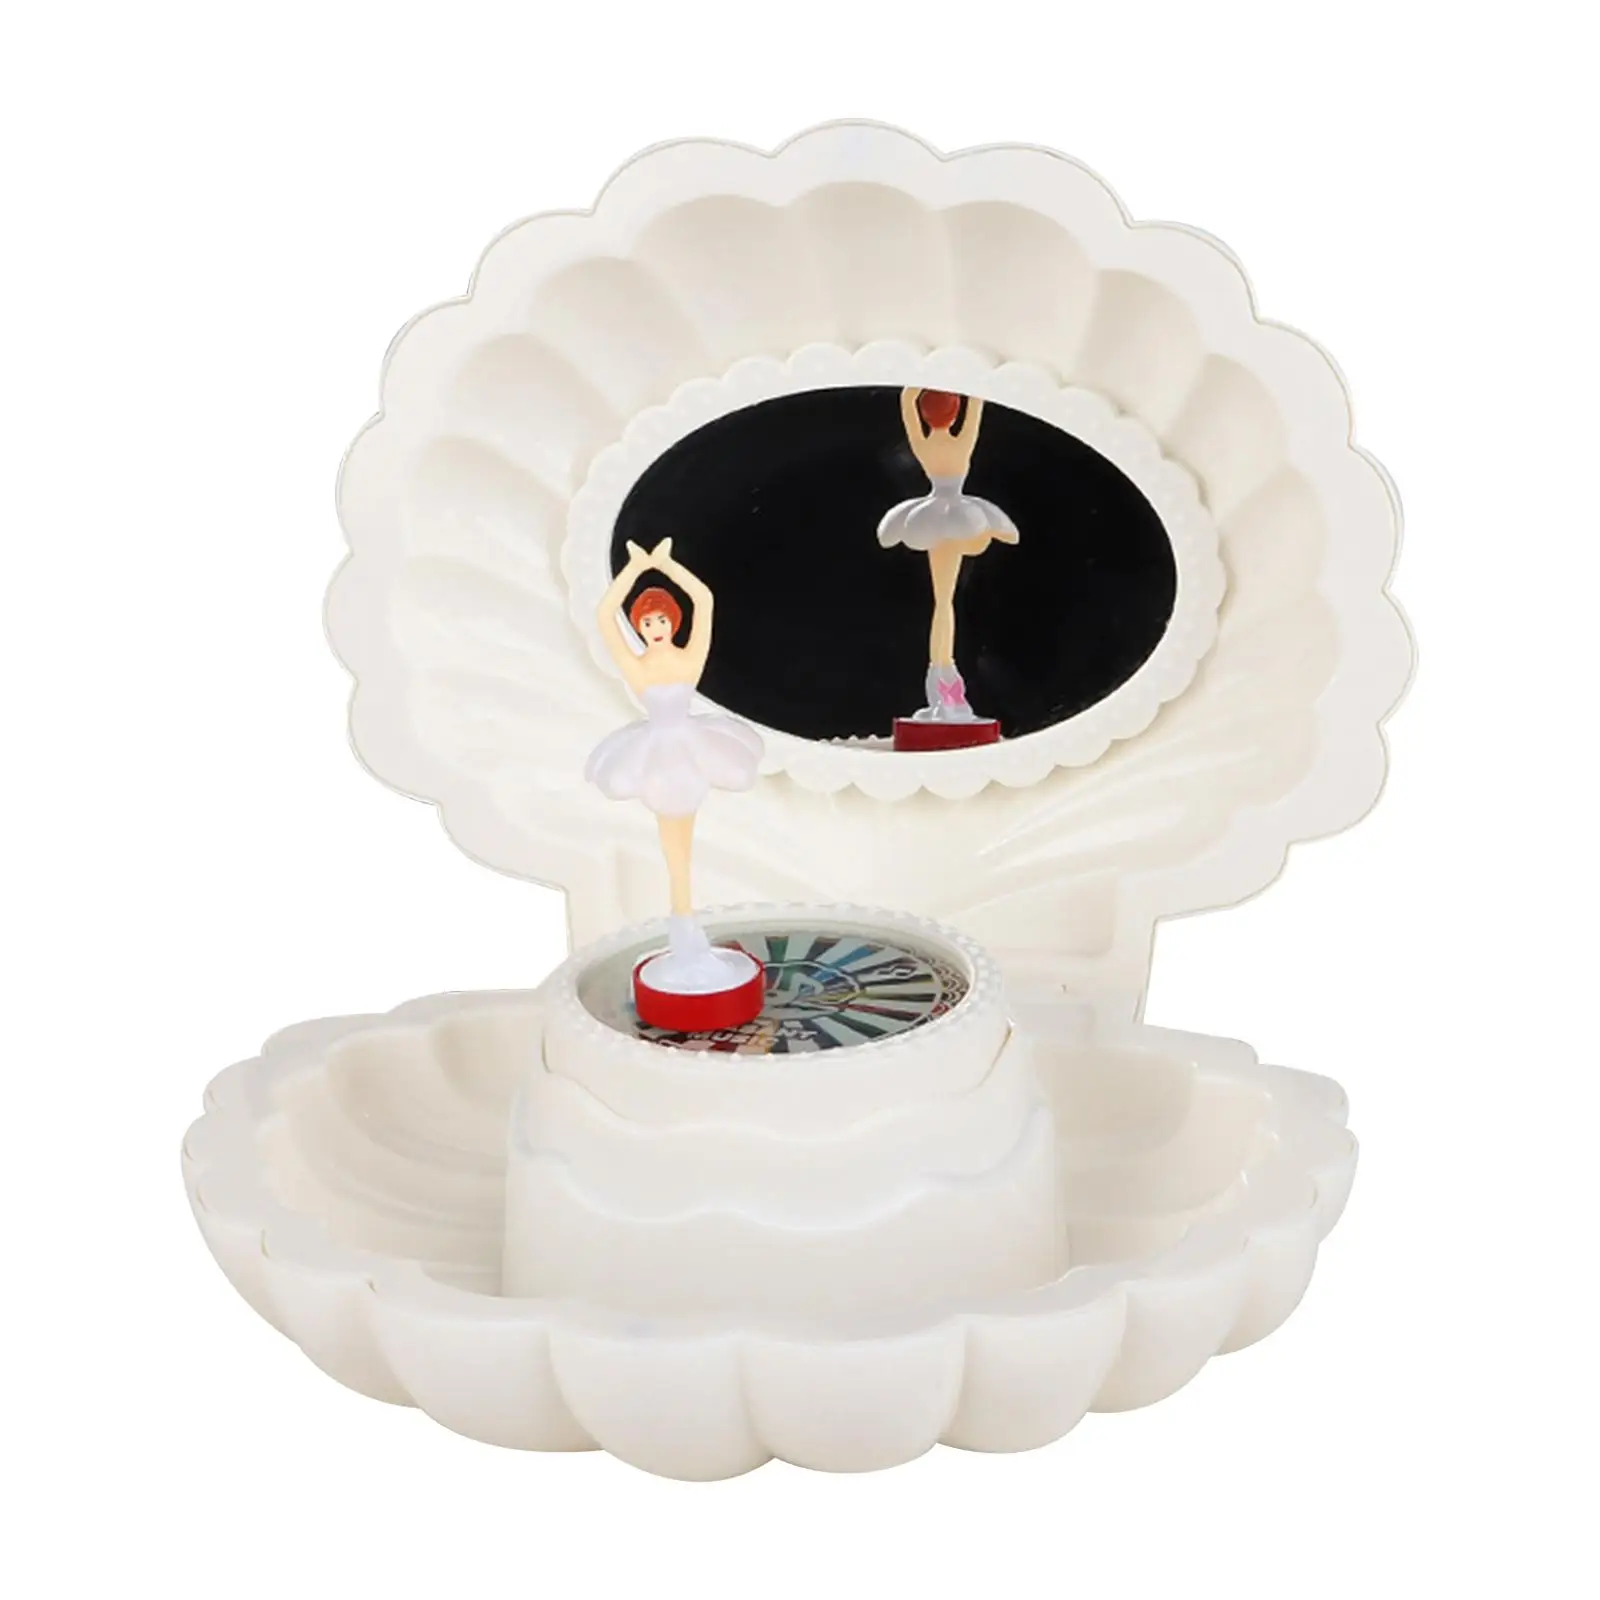 Shell Shaped Ballerina Storage Case Trinket Jewelry Box and Mirror Musical Trinket Box for Holidays Children Gift Decorative